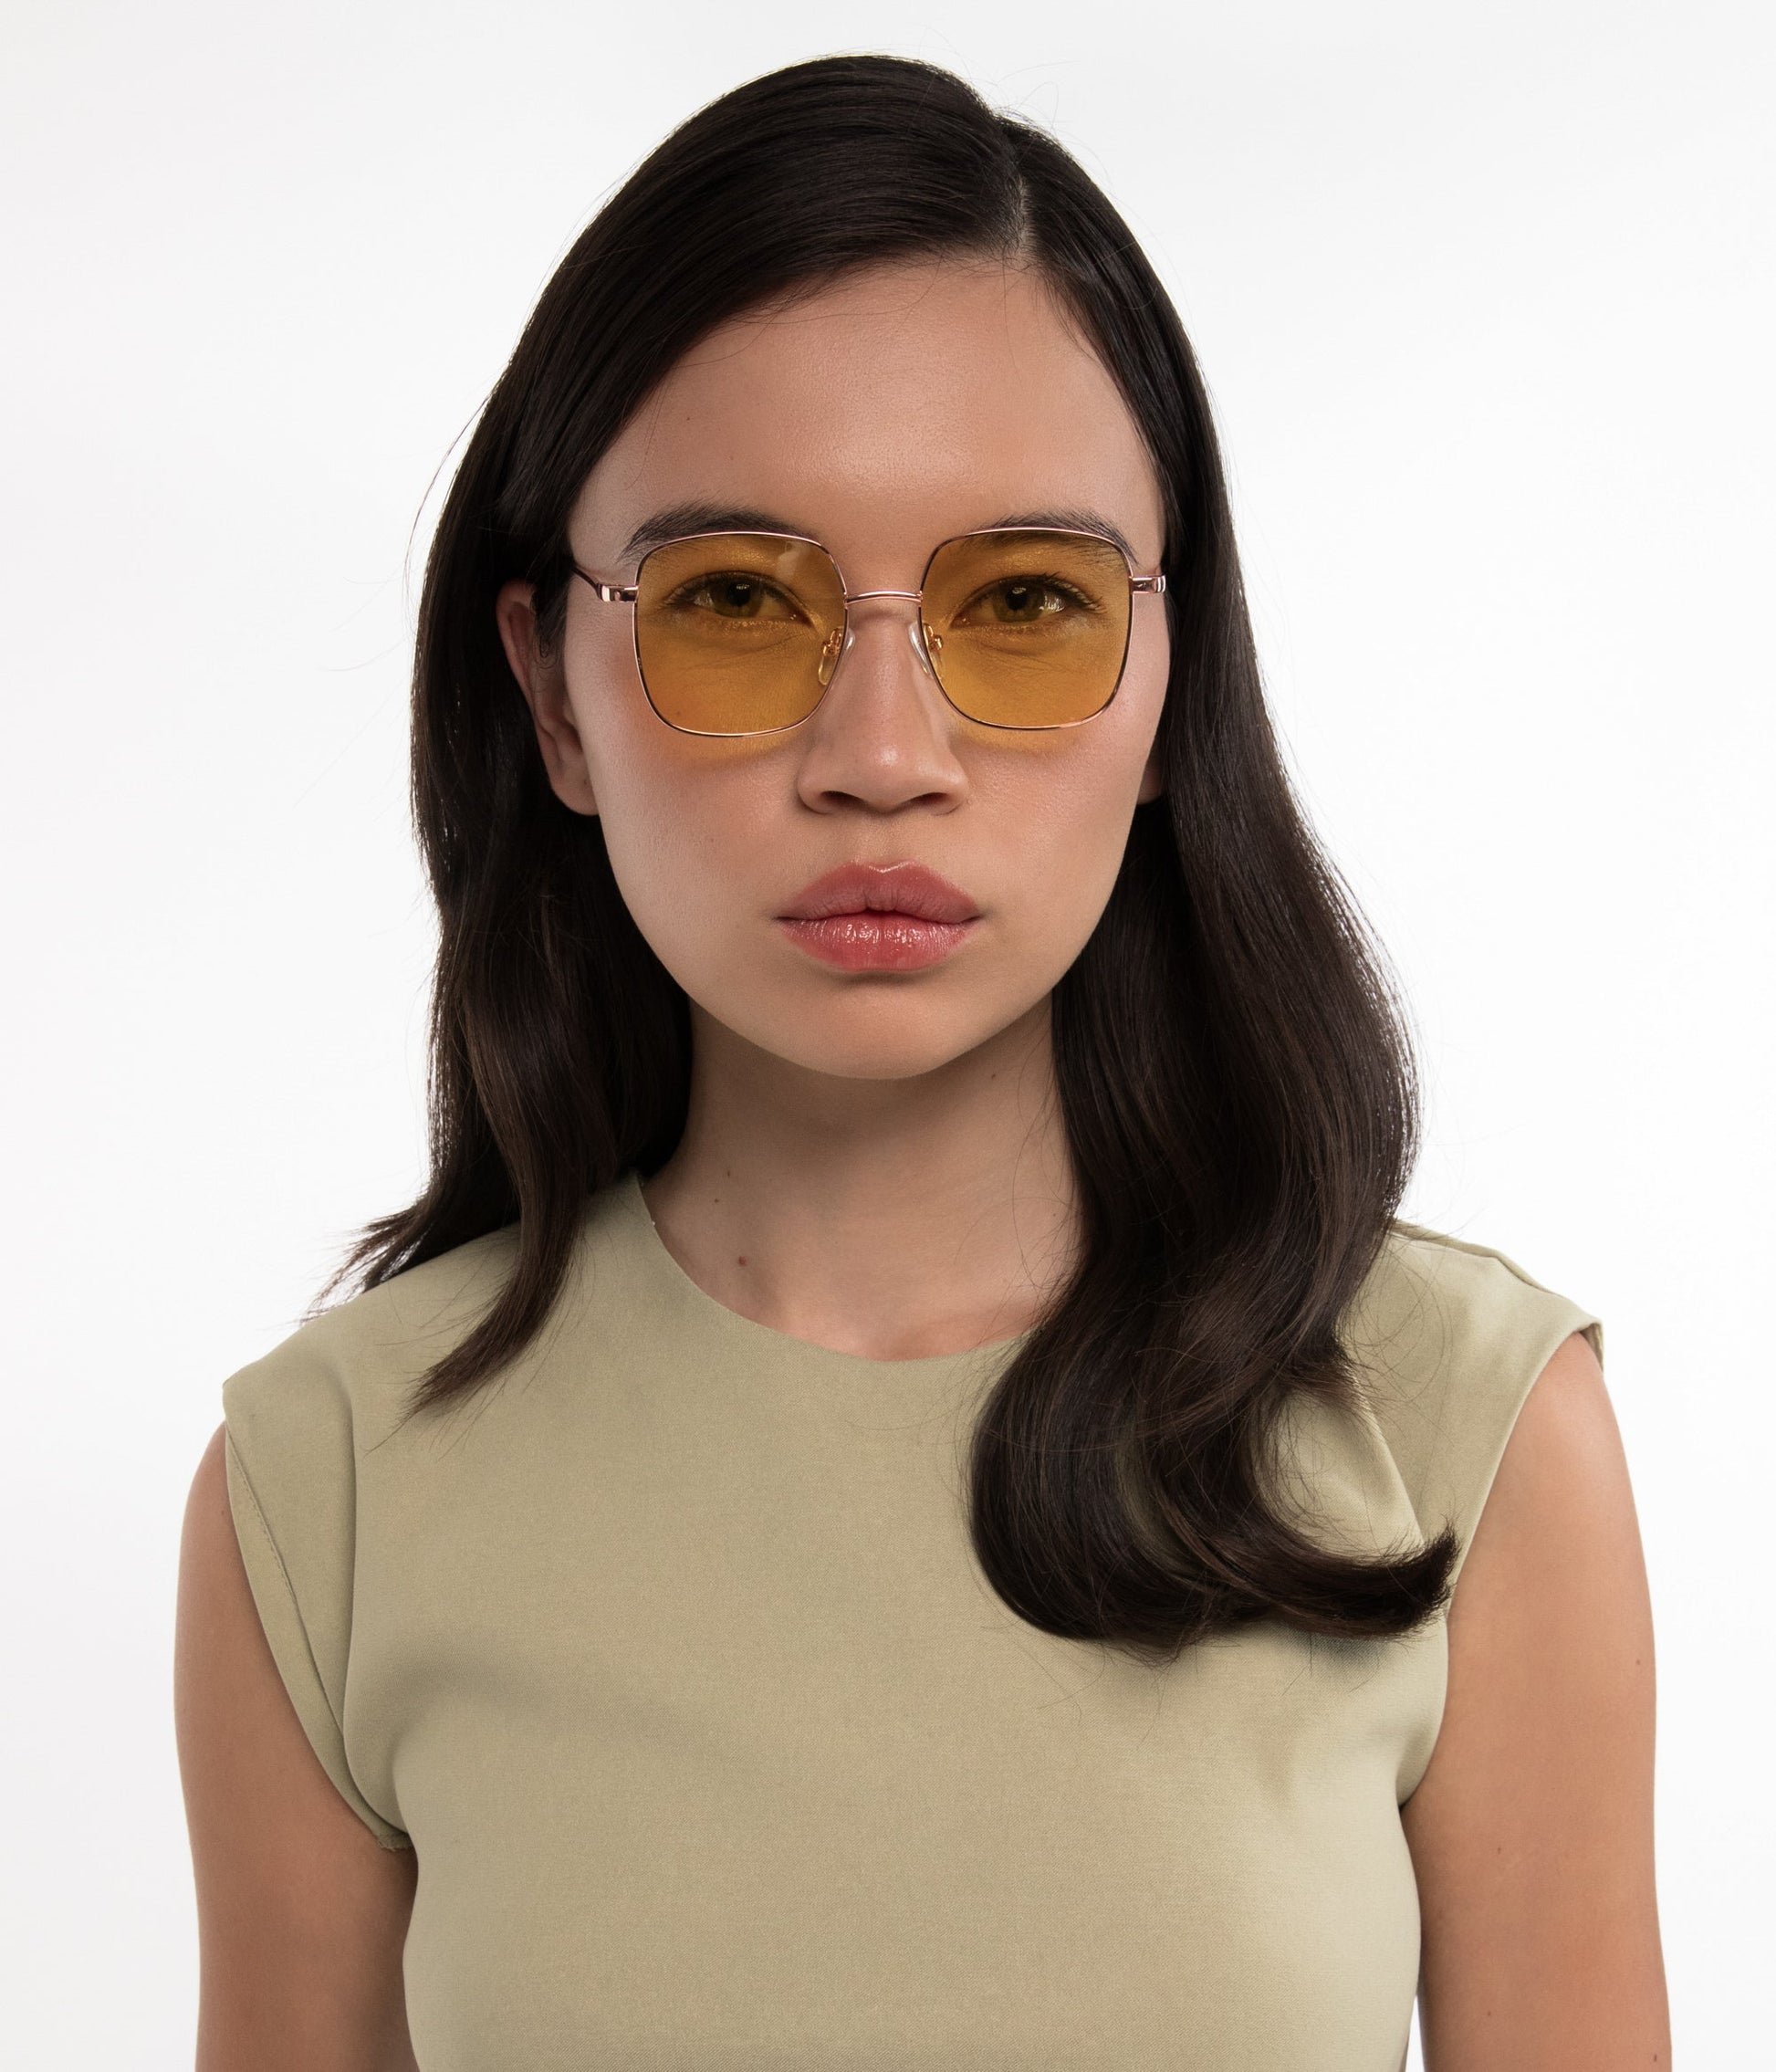 KAYASM Small Square Sunglasses | Color: Gold, Brown - variant::brown